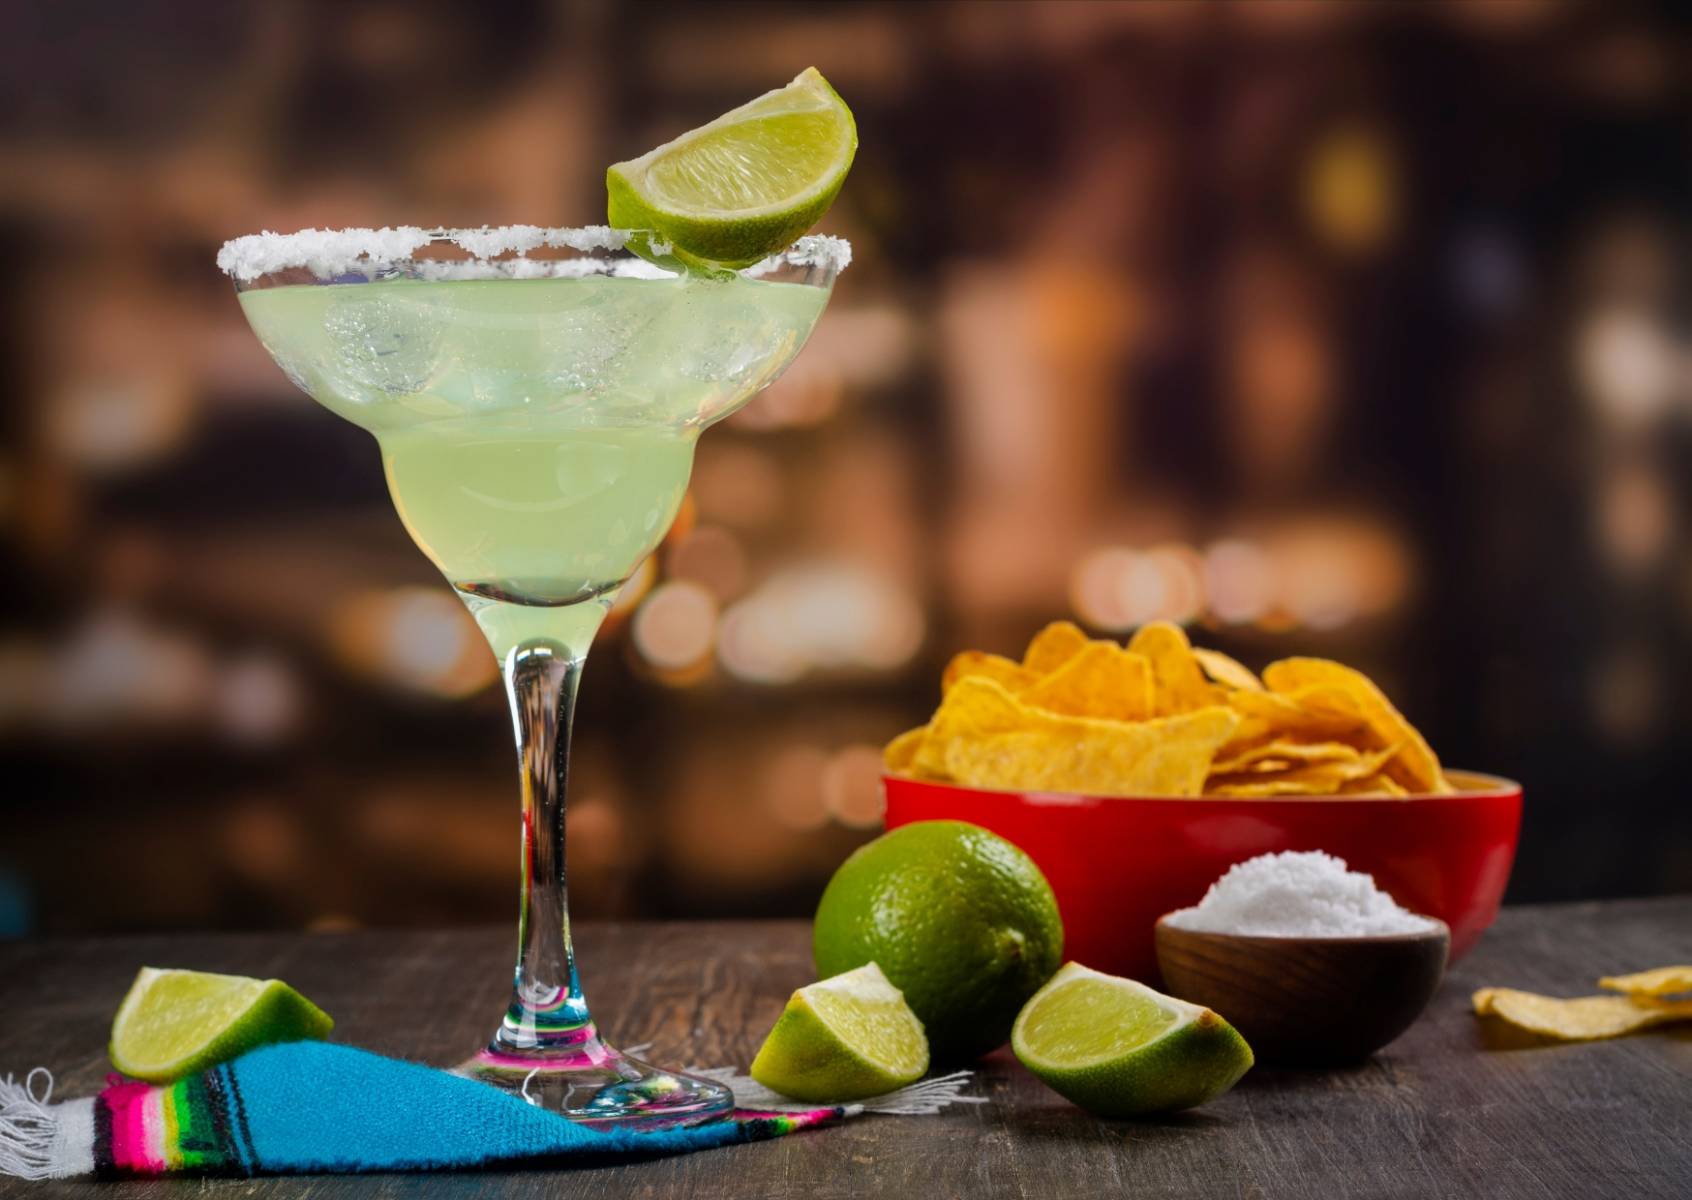 IT’S TIME FOR HAPPY HOUR FIESTA! THE MEXICAN WAY